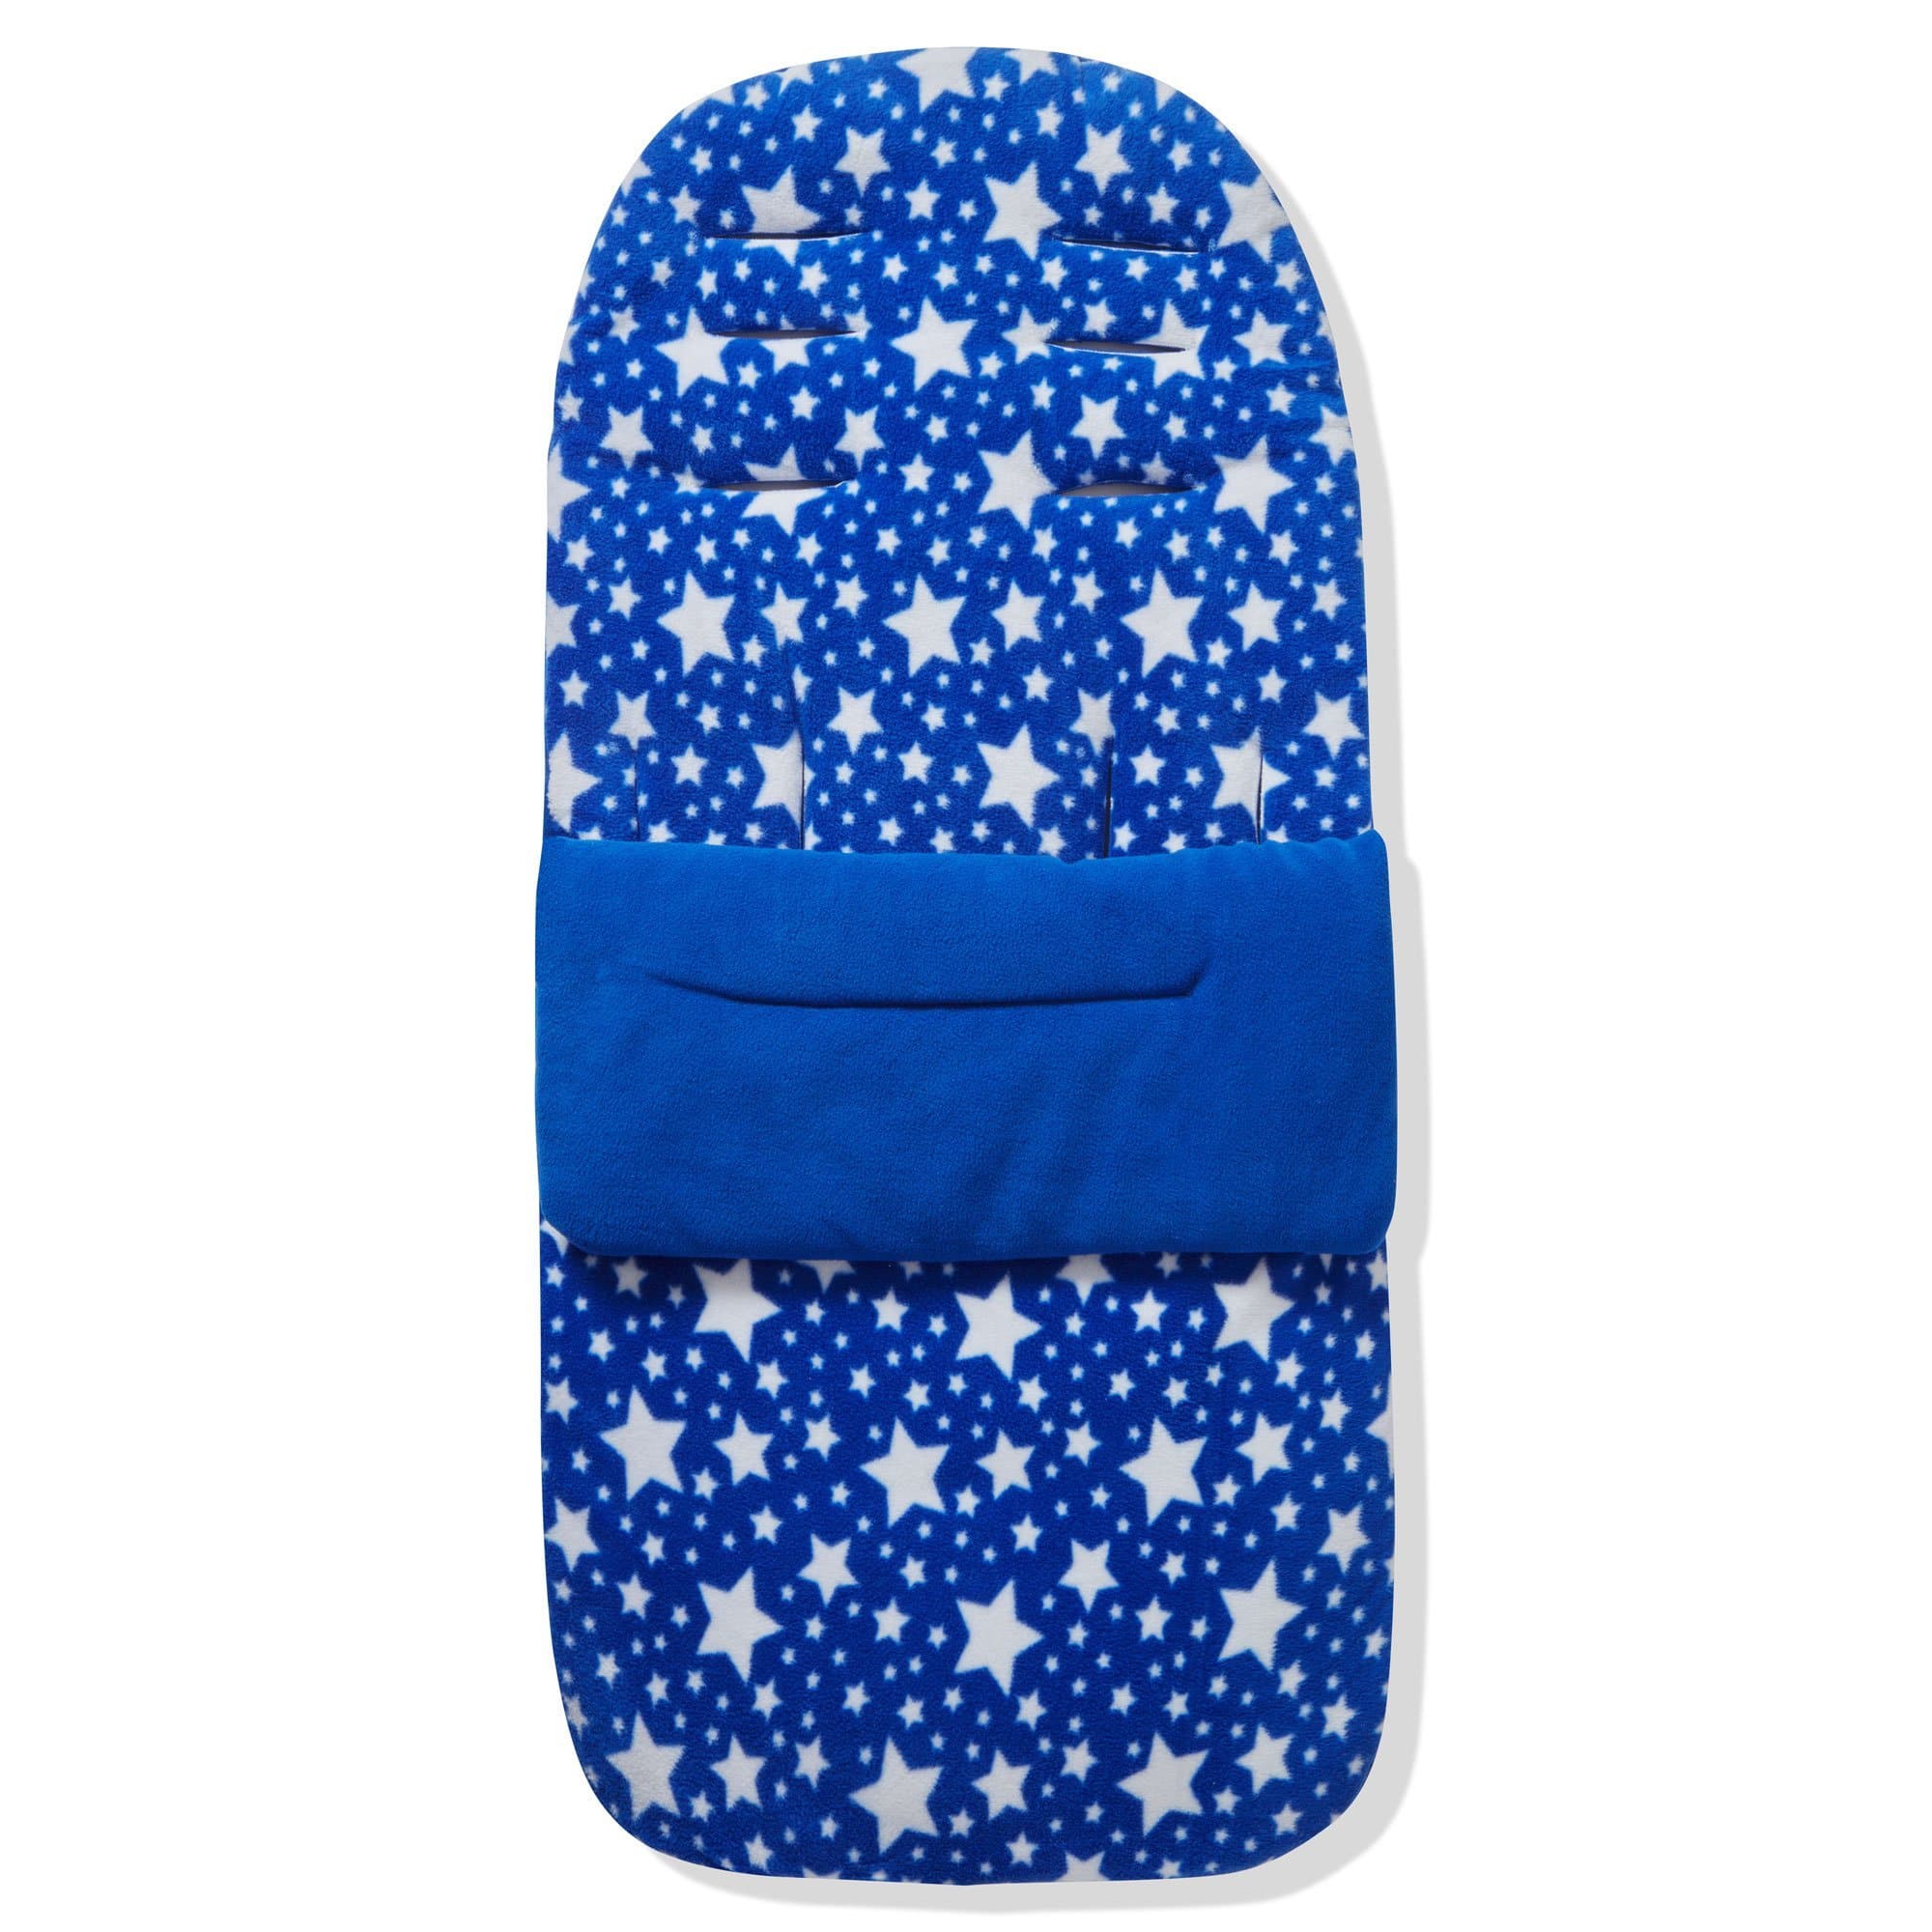 Fleece Footmuff / Cosy Toes Compatible with Seed - Blue Star / Fits All Models | For Your Little One